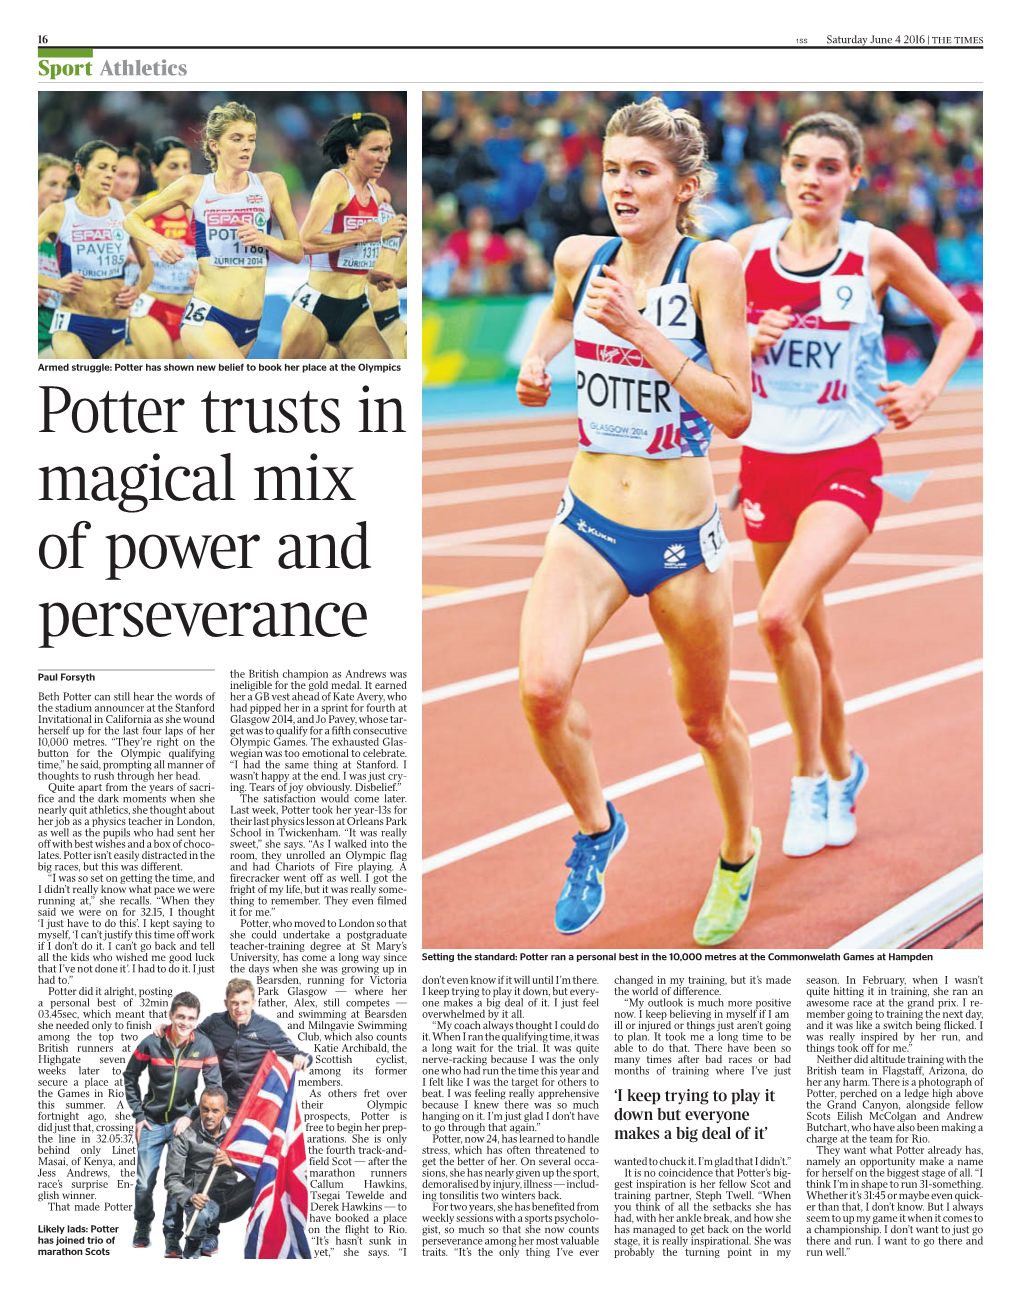 Potter Trusts in Magical Mix of Power and Perseverance